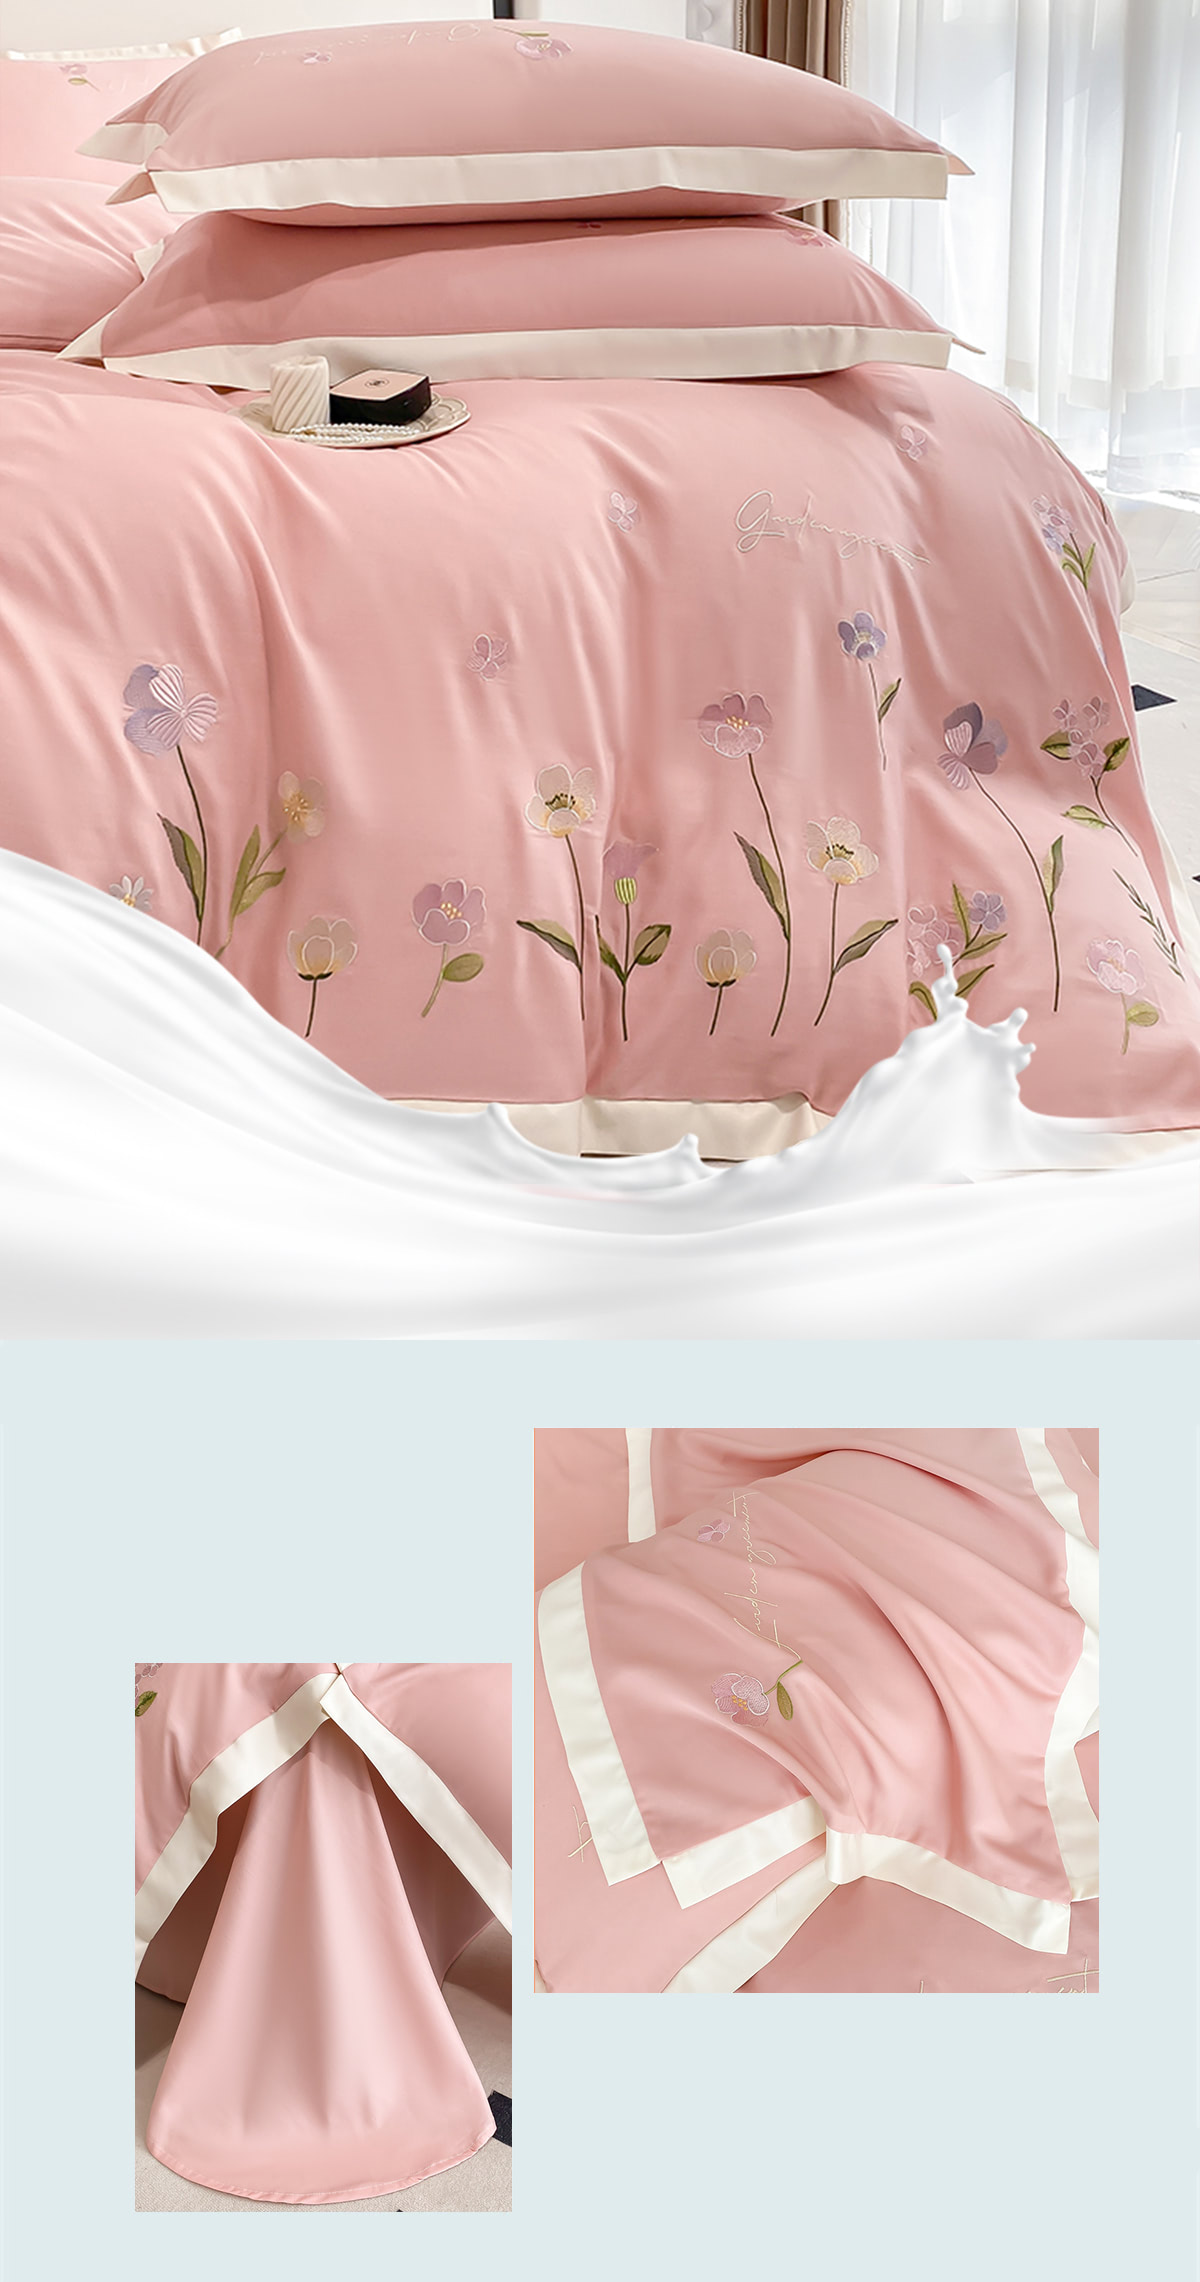 Embroidery-Lyocell-Tencel-Satin-Bed-Sheets-Set-Queen-King-Size13